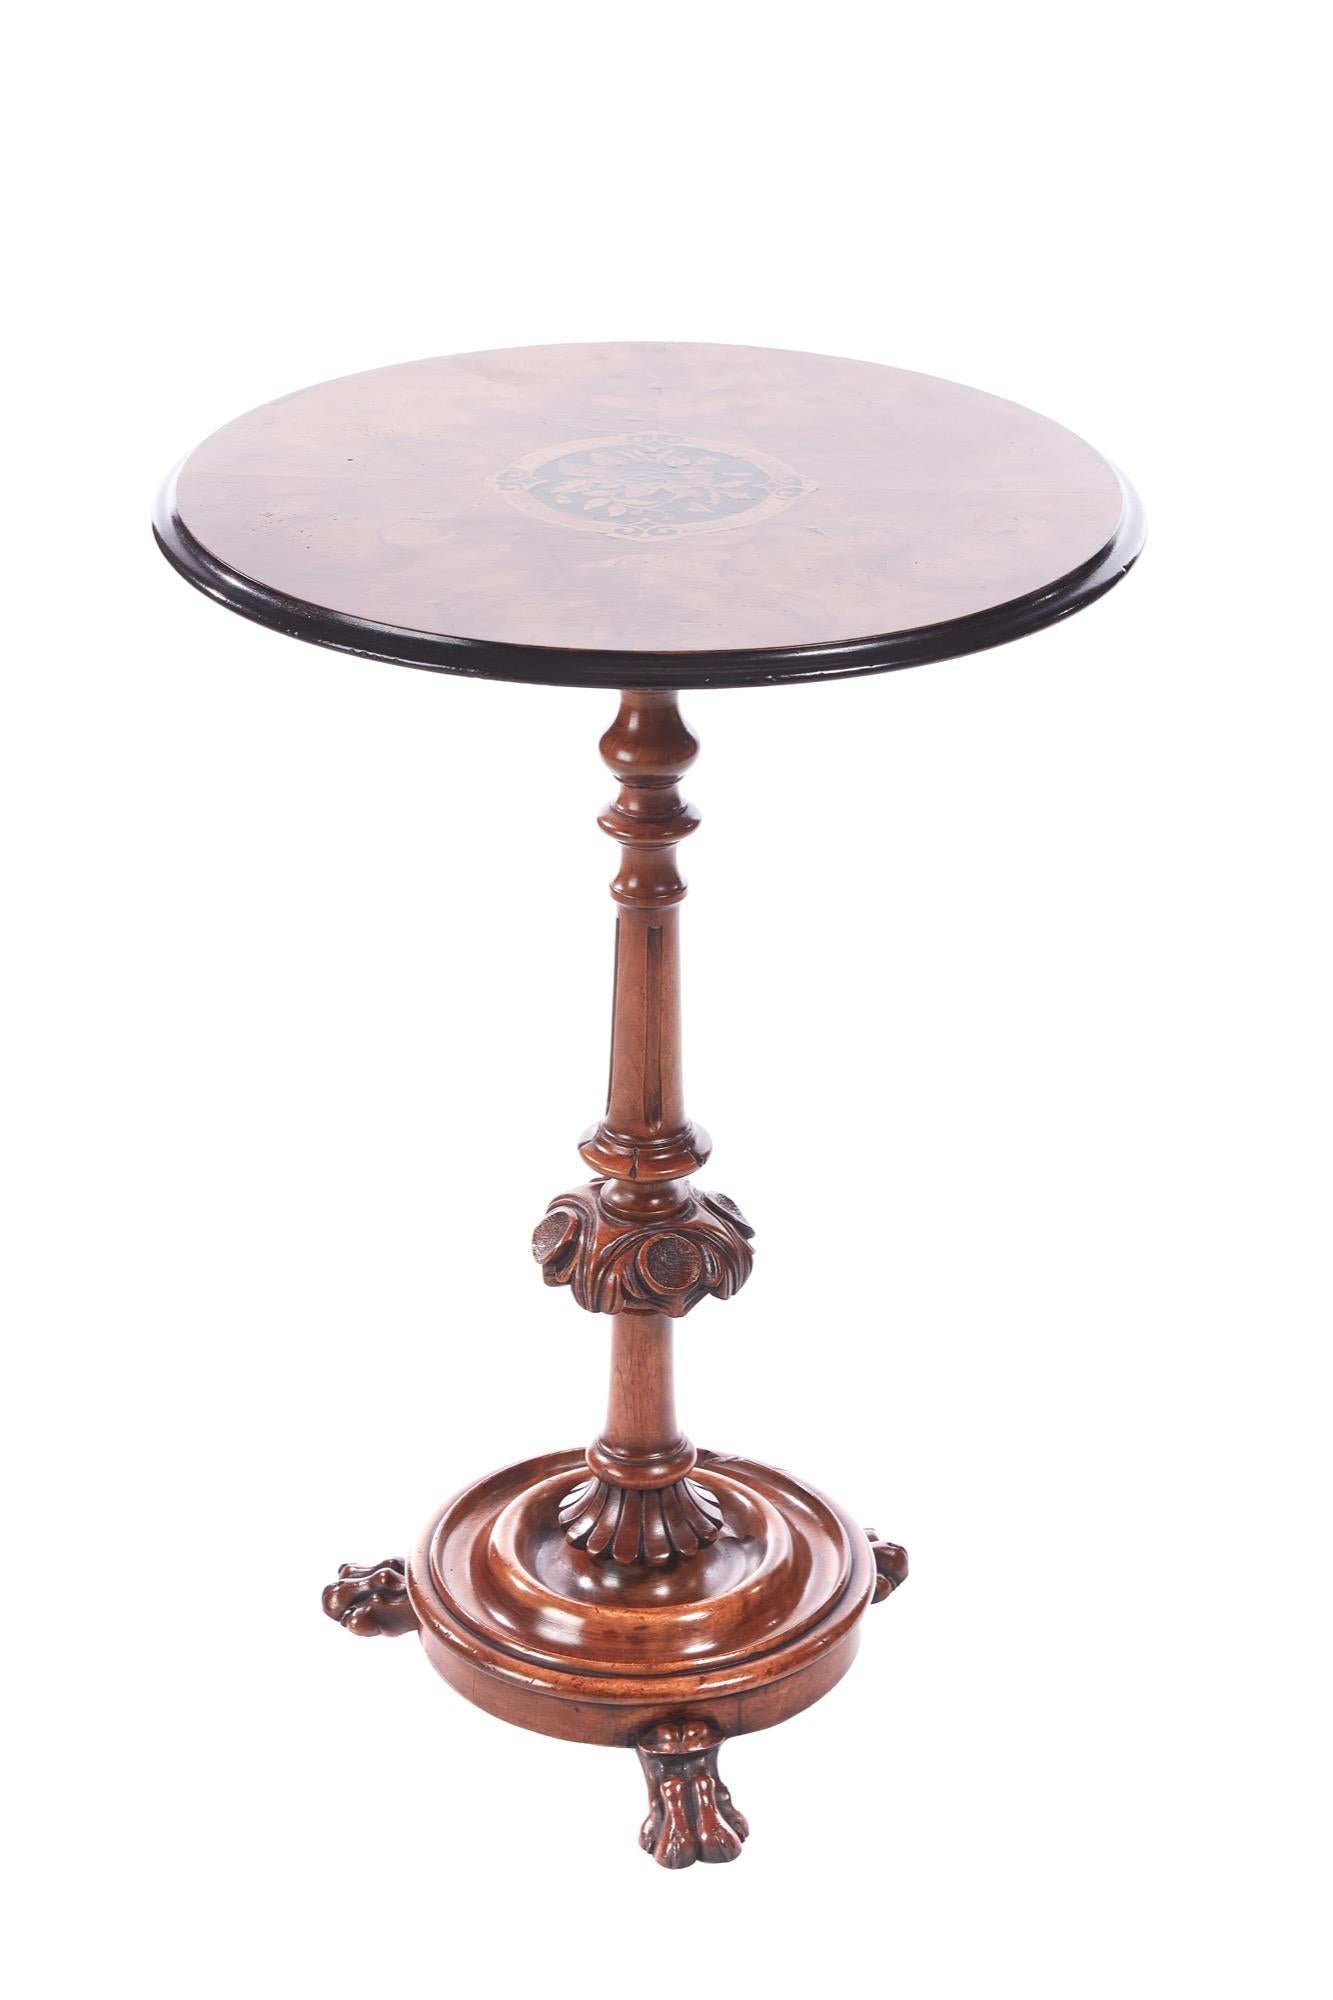 Quality antique Victorian marquetry burr walnut lamp table having a lovely burr walnut marquetry top with a thumb moulded edge. Supported by a shaped turned carved walnut column raised on a round shaped platform base with 3 carved paw feet.
Lovely